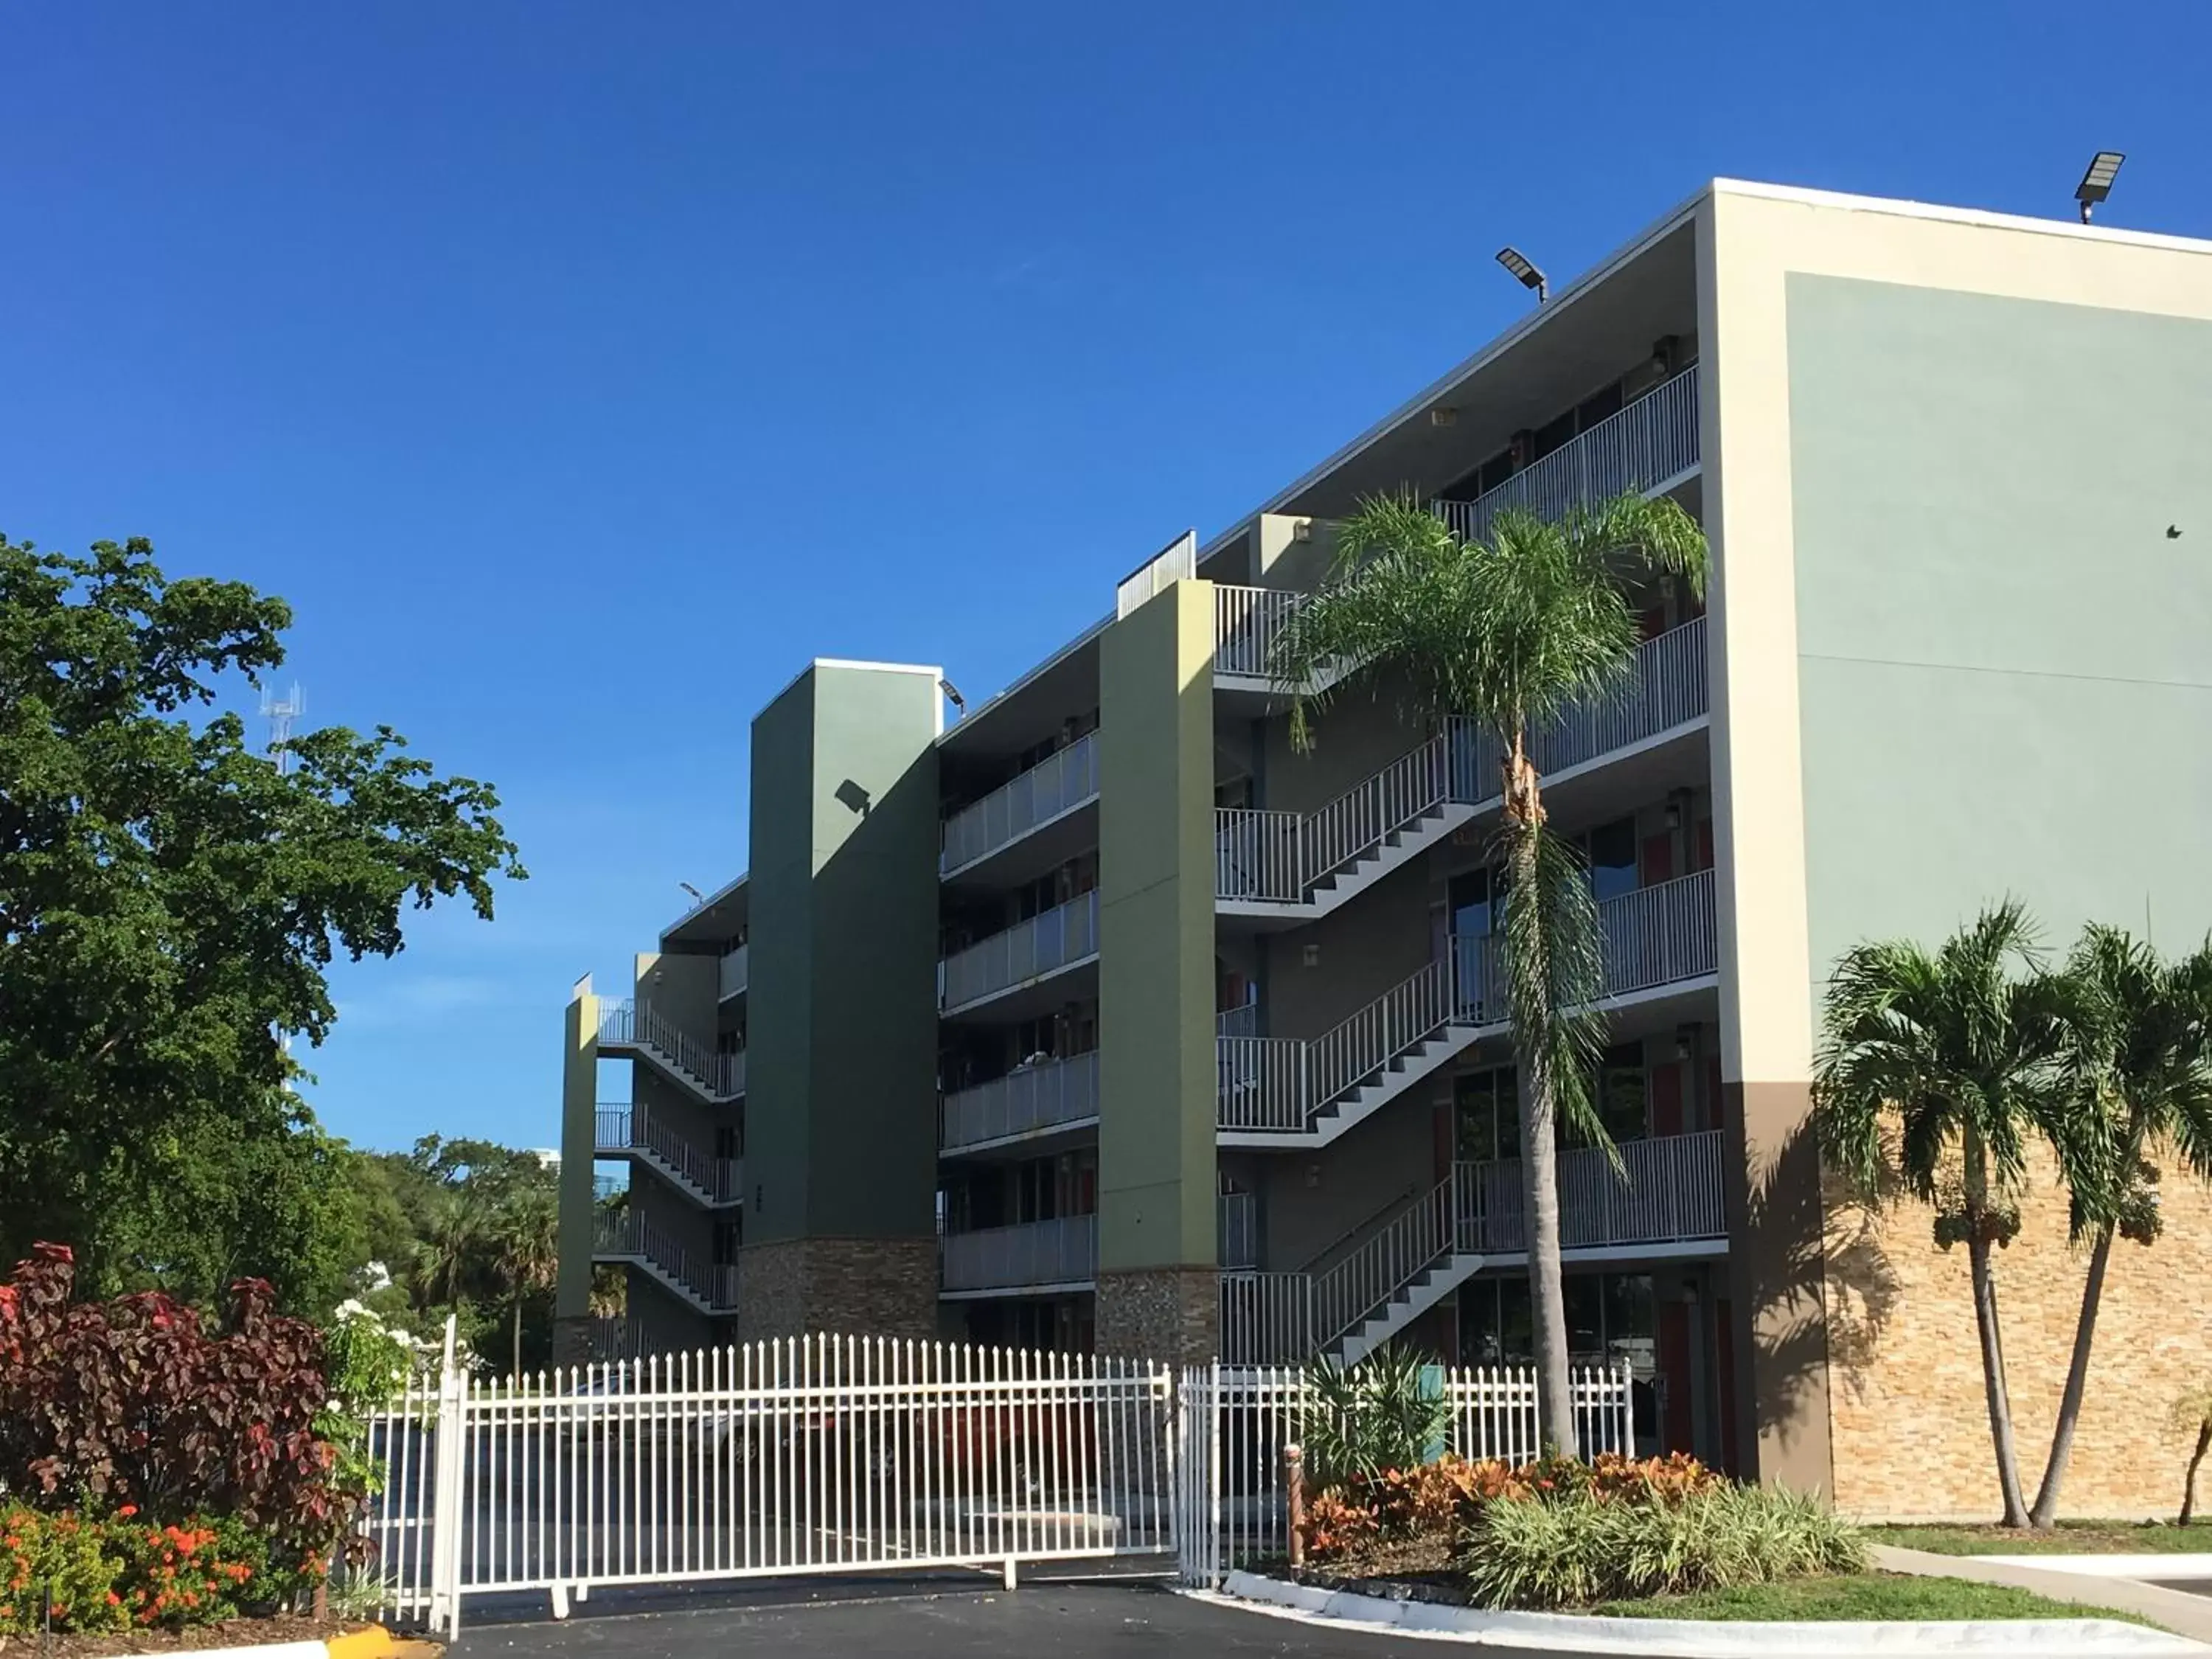 Facade/entrance, Property Building in Days Inn by Wyndham Fort Lauderdale Airport Cruise Port